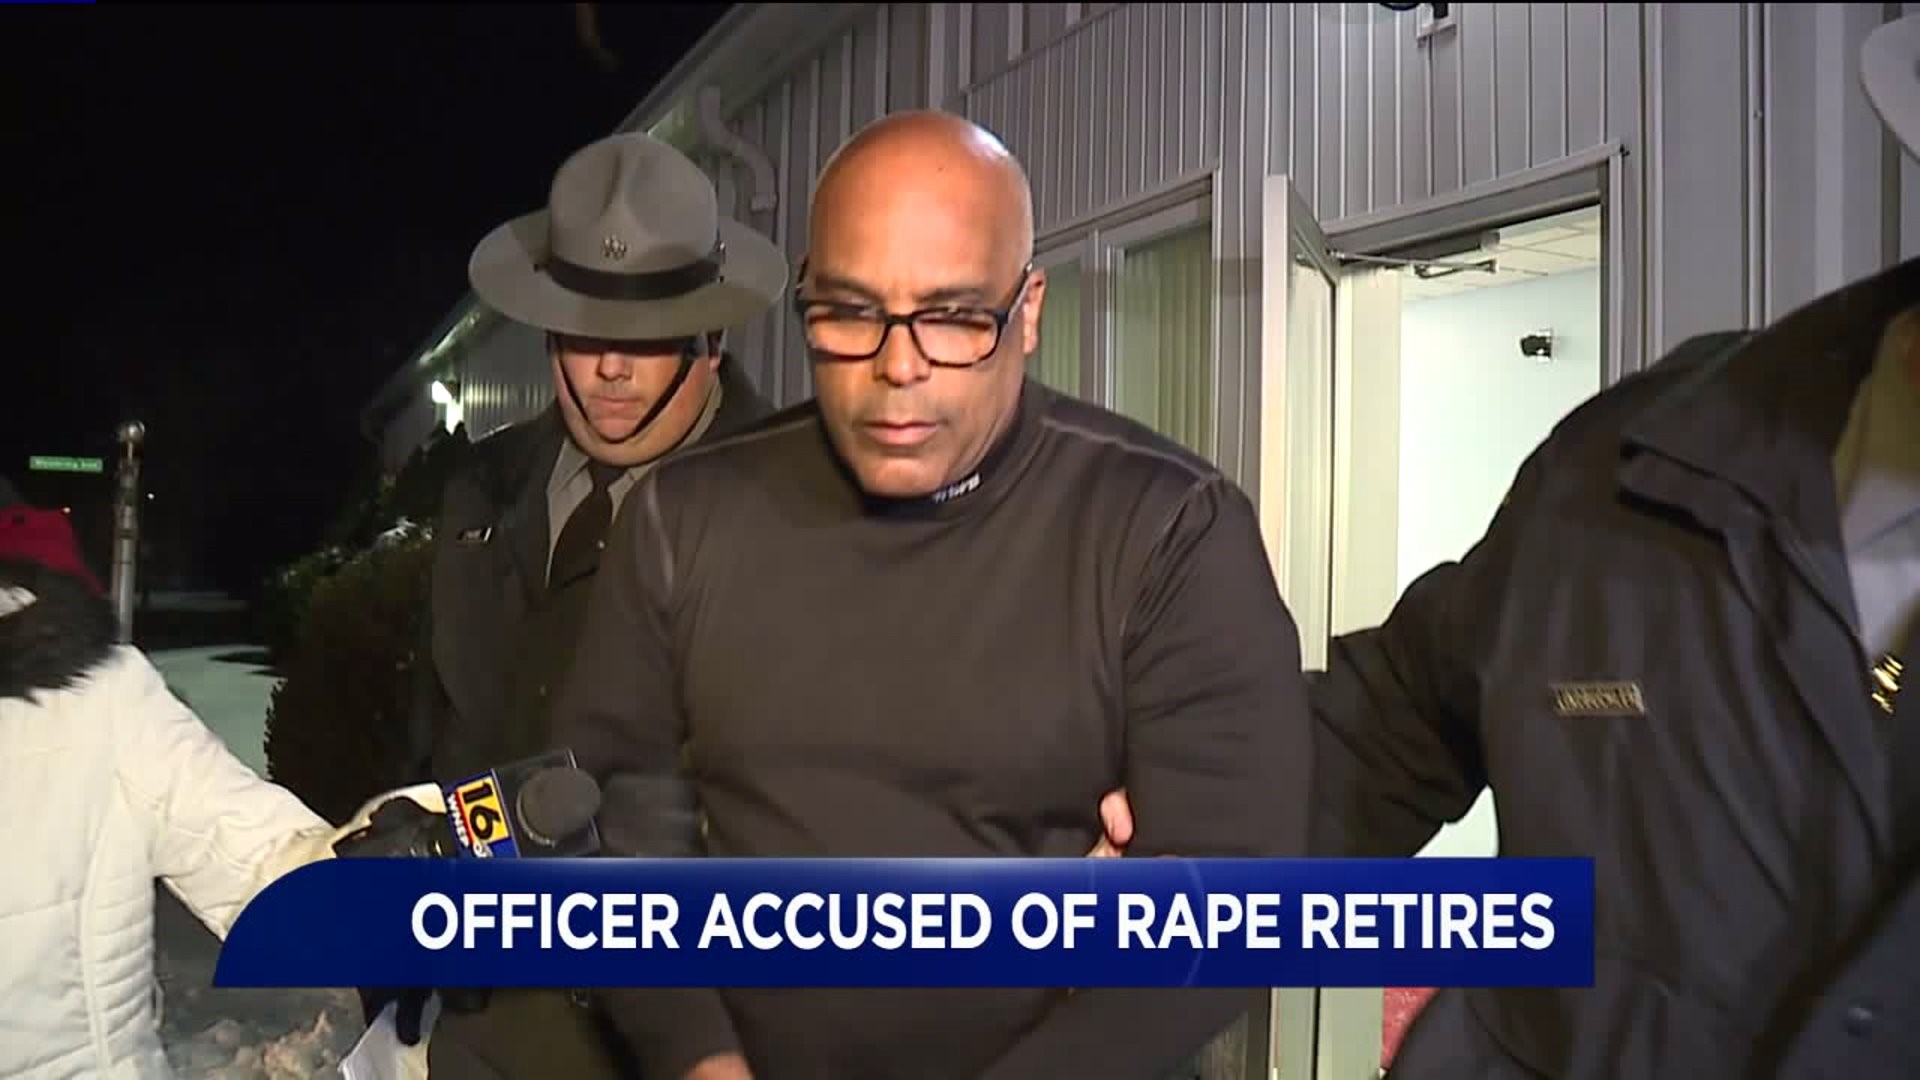 Police Officer Accused of Sexual Assault Retires